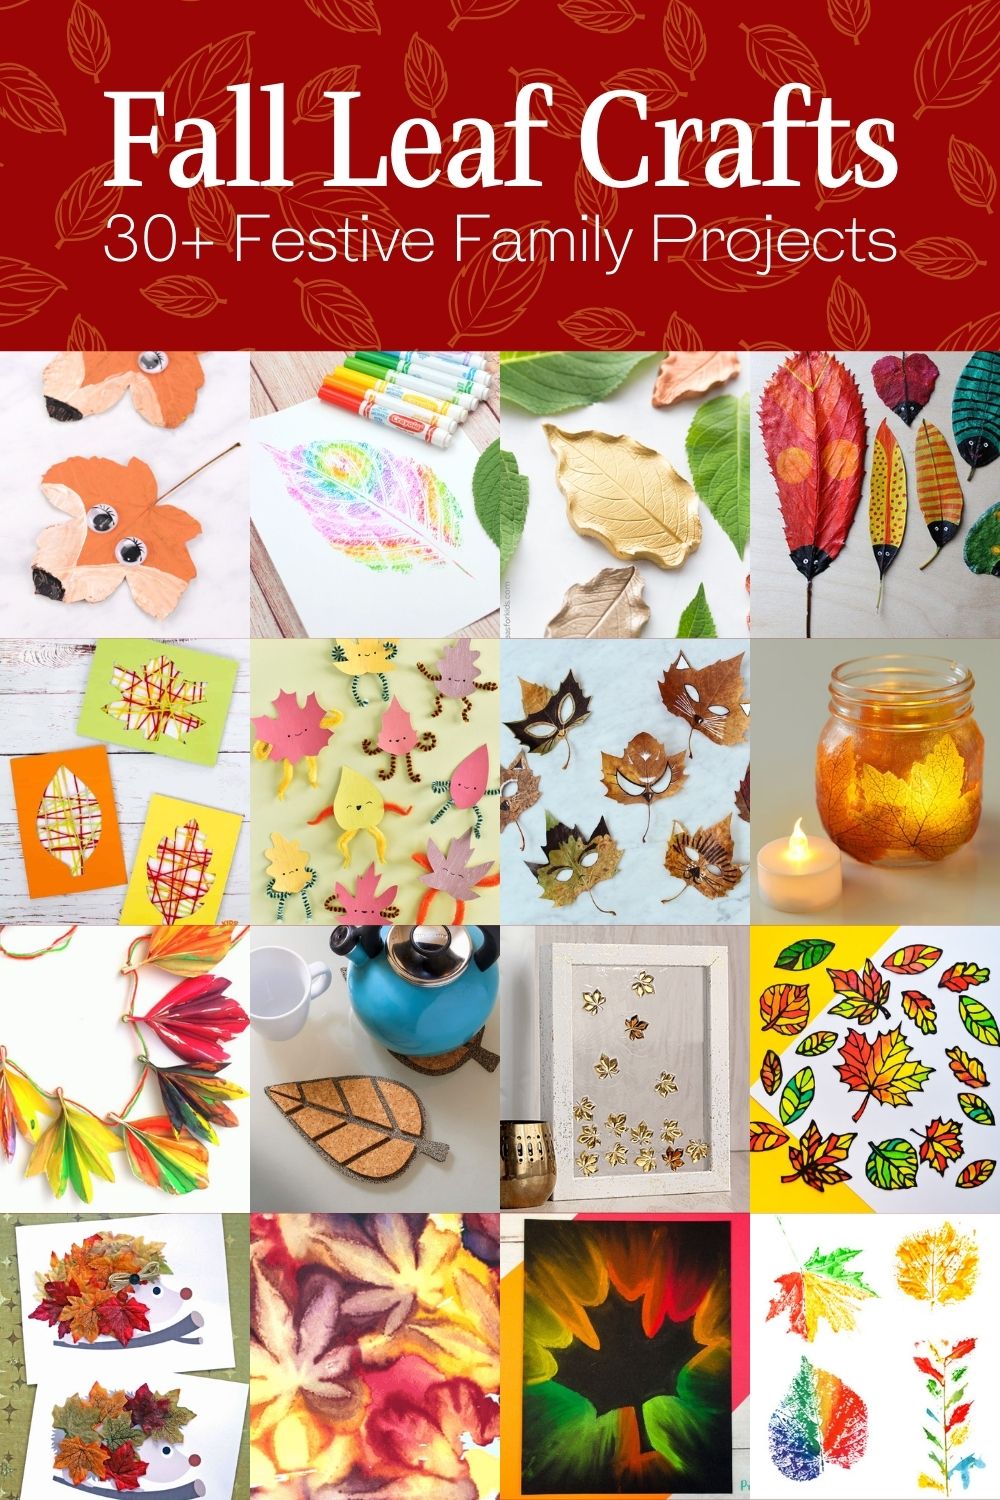 https://diycandy.b-cdn.net/wp-content/uploads/2021/04/Over-30-festive-fall-leaf-crafts-for-the-family.jpg